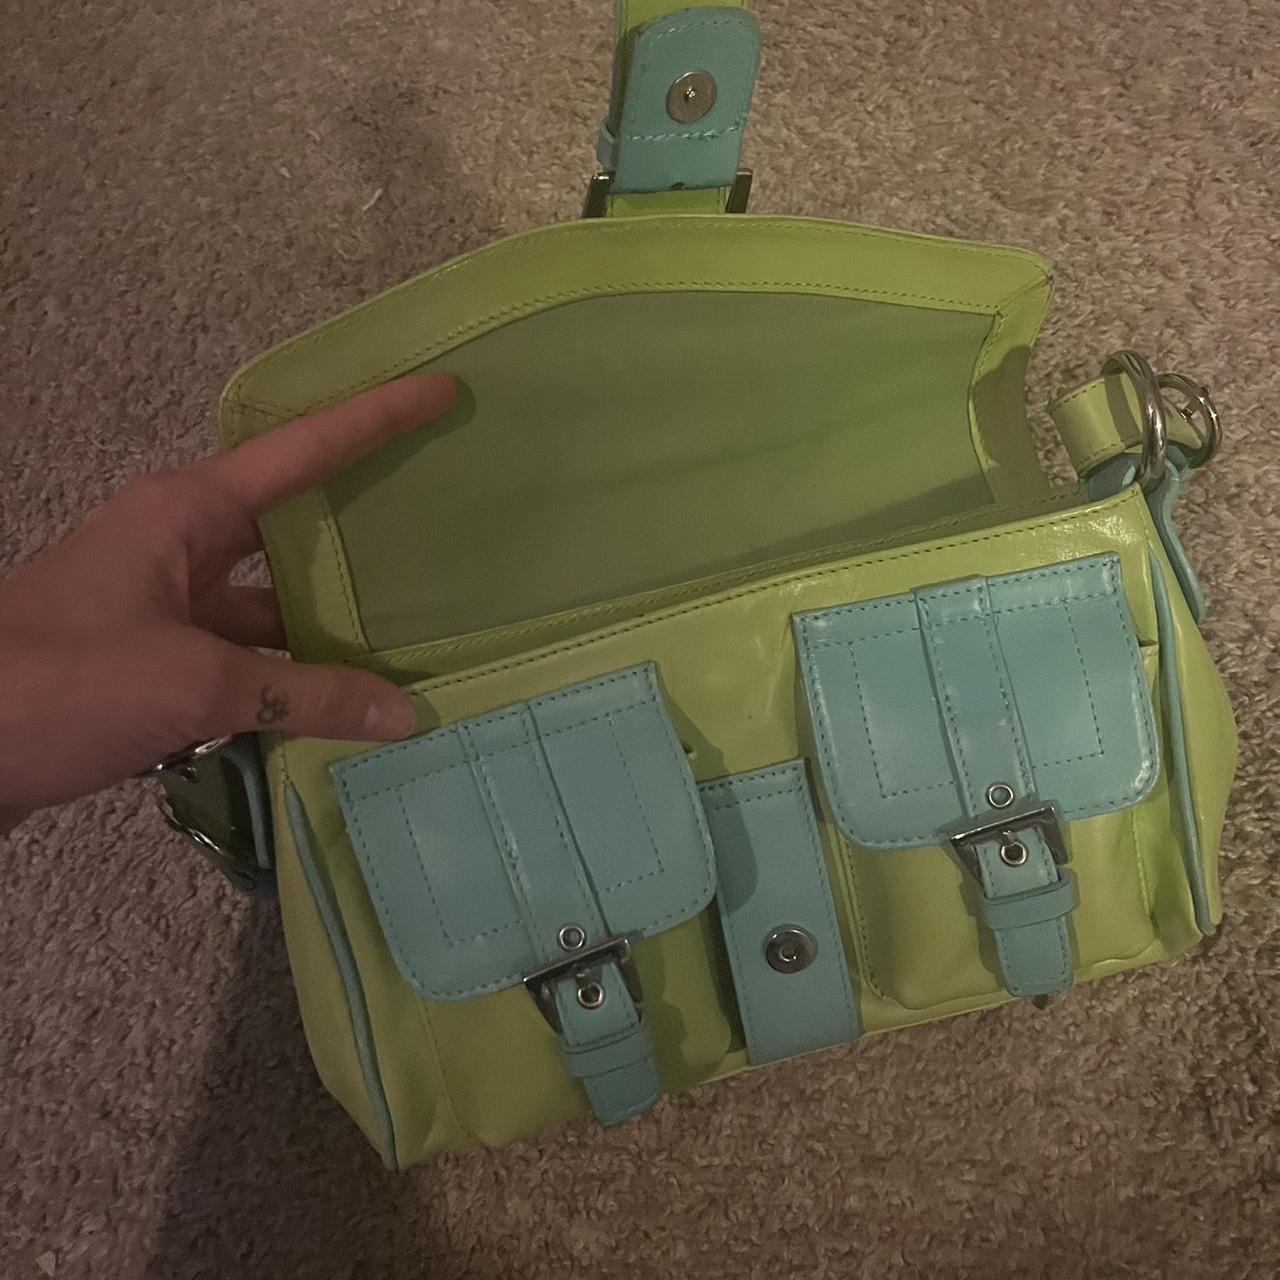 Current Seen Women's Green and Blue Bag (2)